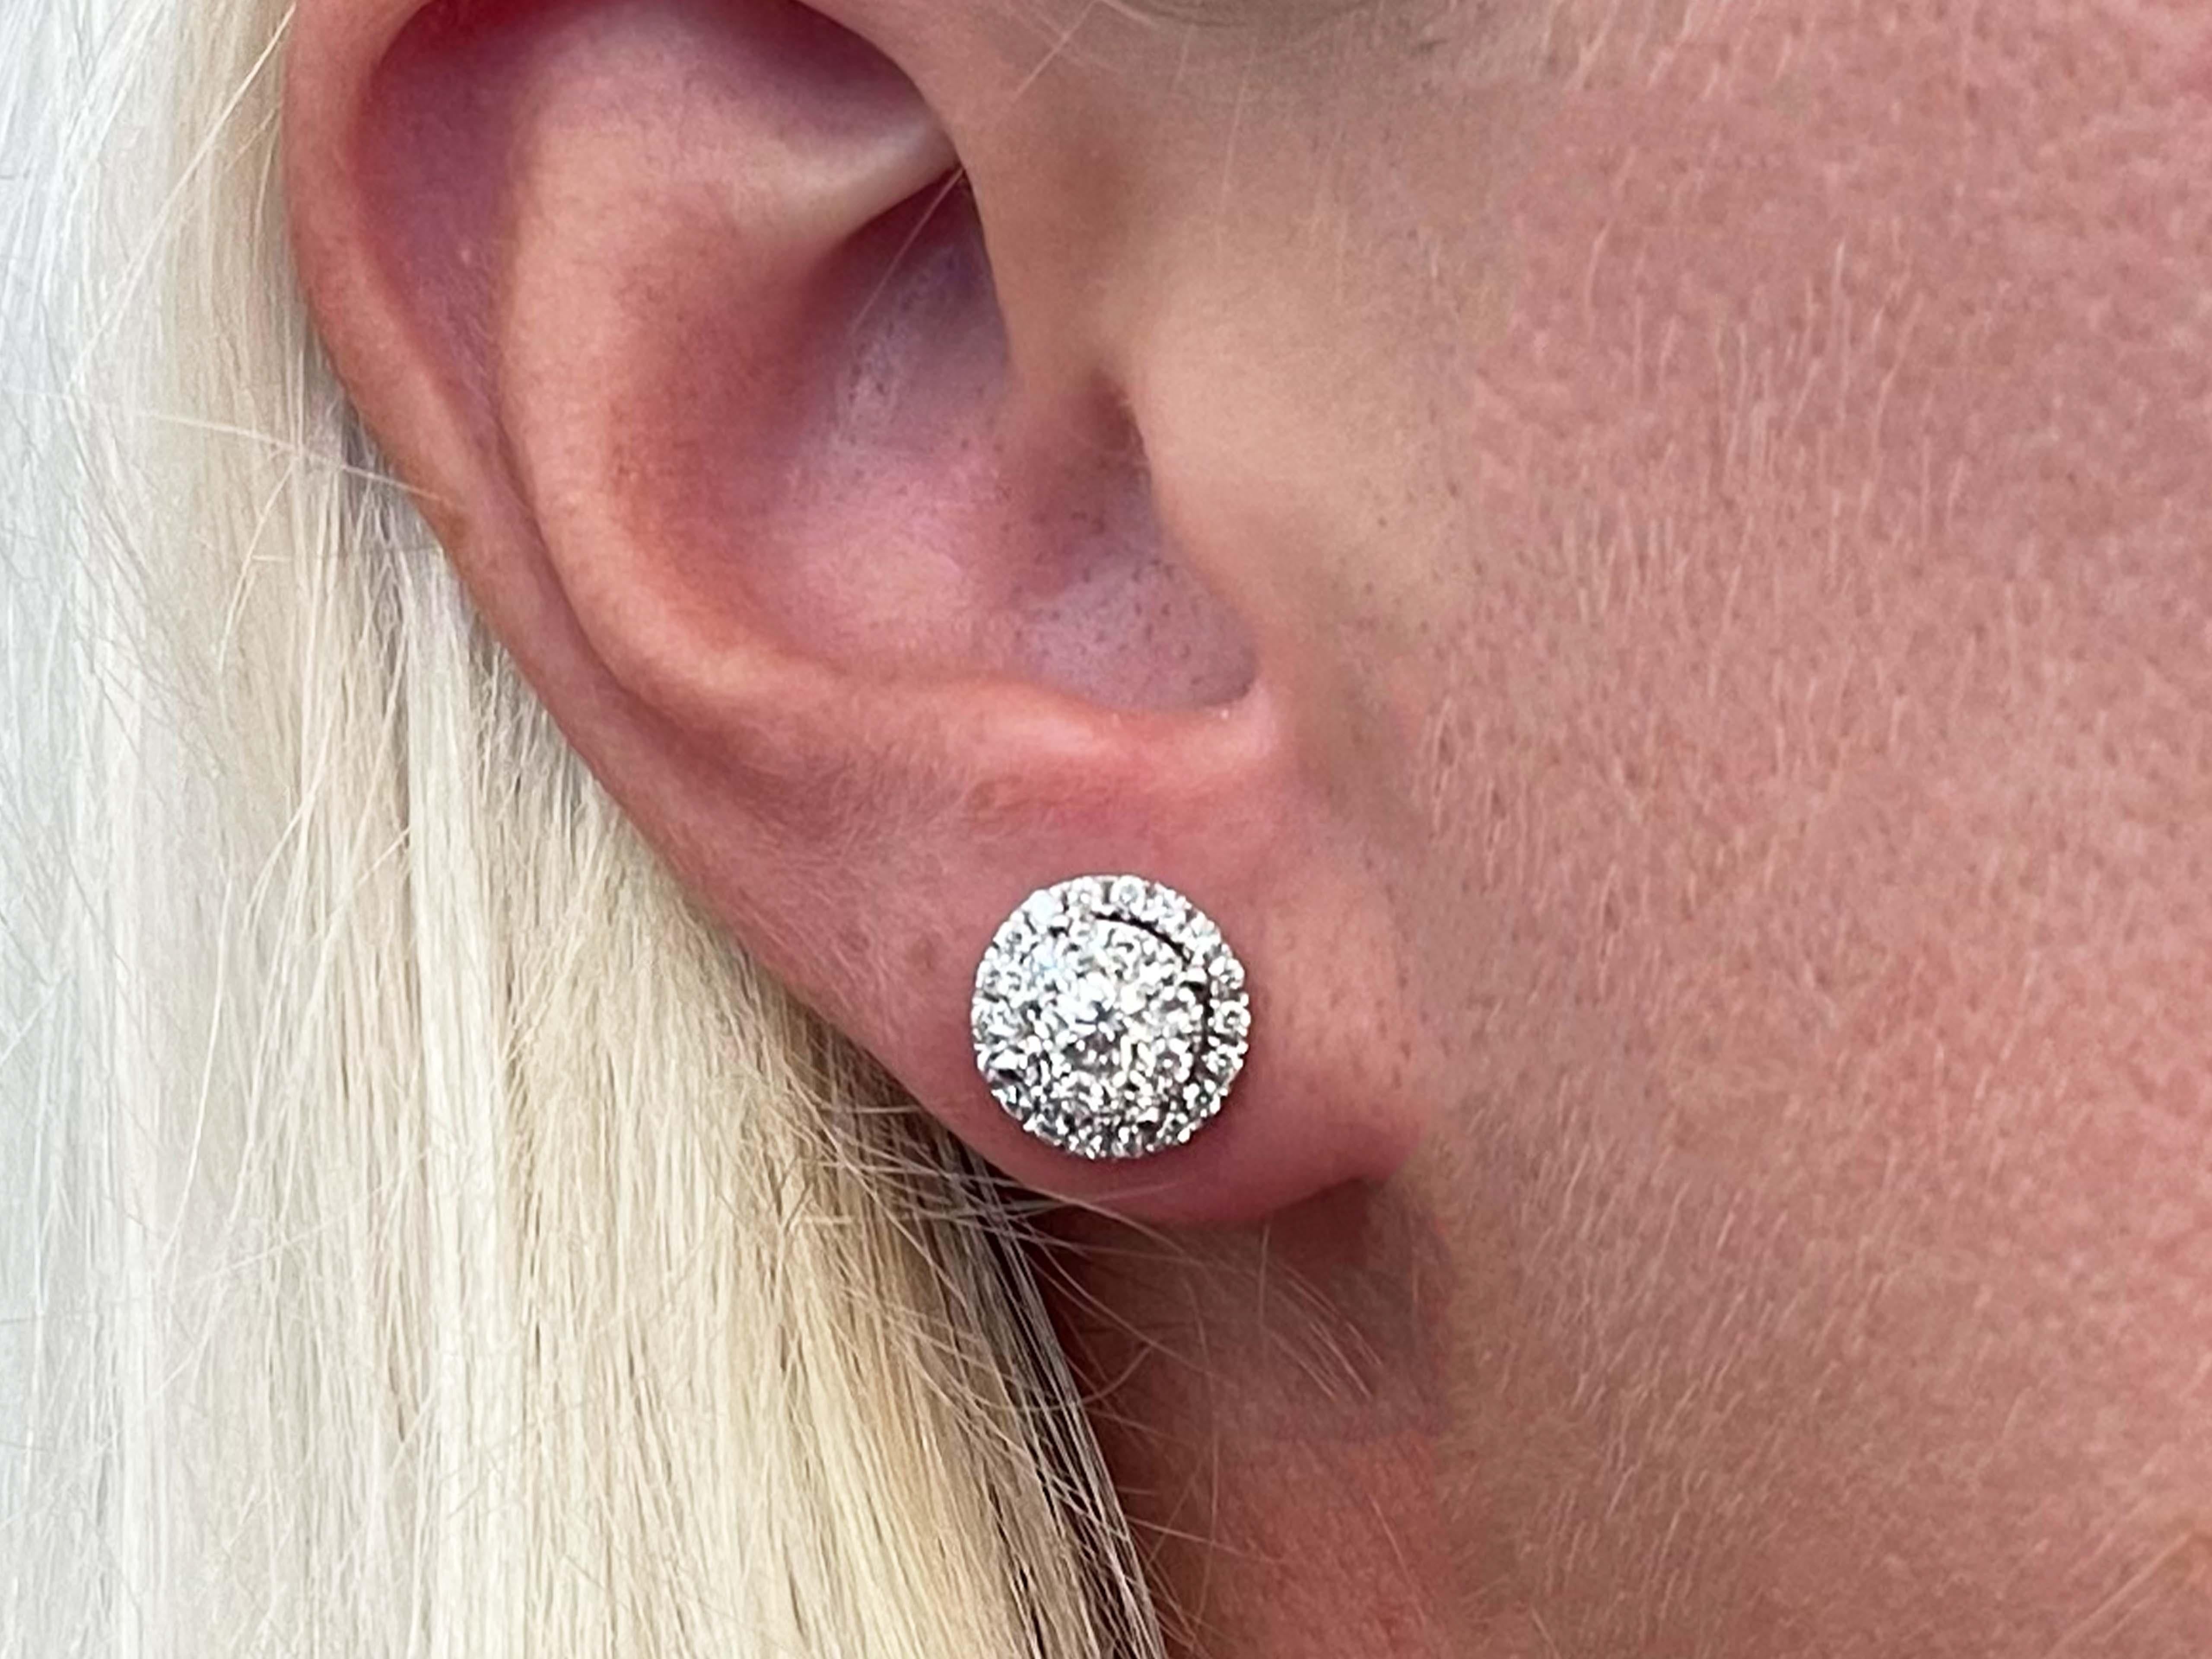 Earrings Specifications:

Metal: 18k White Gold

Earring Diameter: 9.94 mm

Total Weight: 3.4 Grams

Total Diamonds: 56

Diamond Color: G

Diamond Clarity: VS

Diamond Total Carat Weight: 0.70 carats

Condition: Preowned

Stamped: 